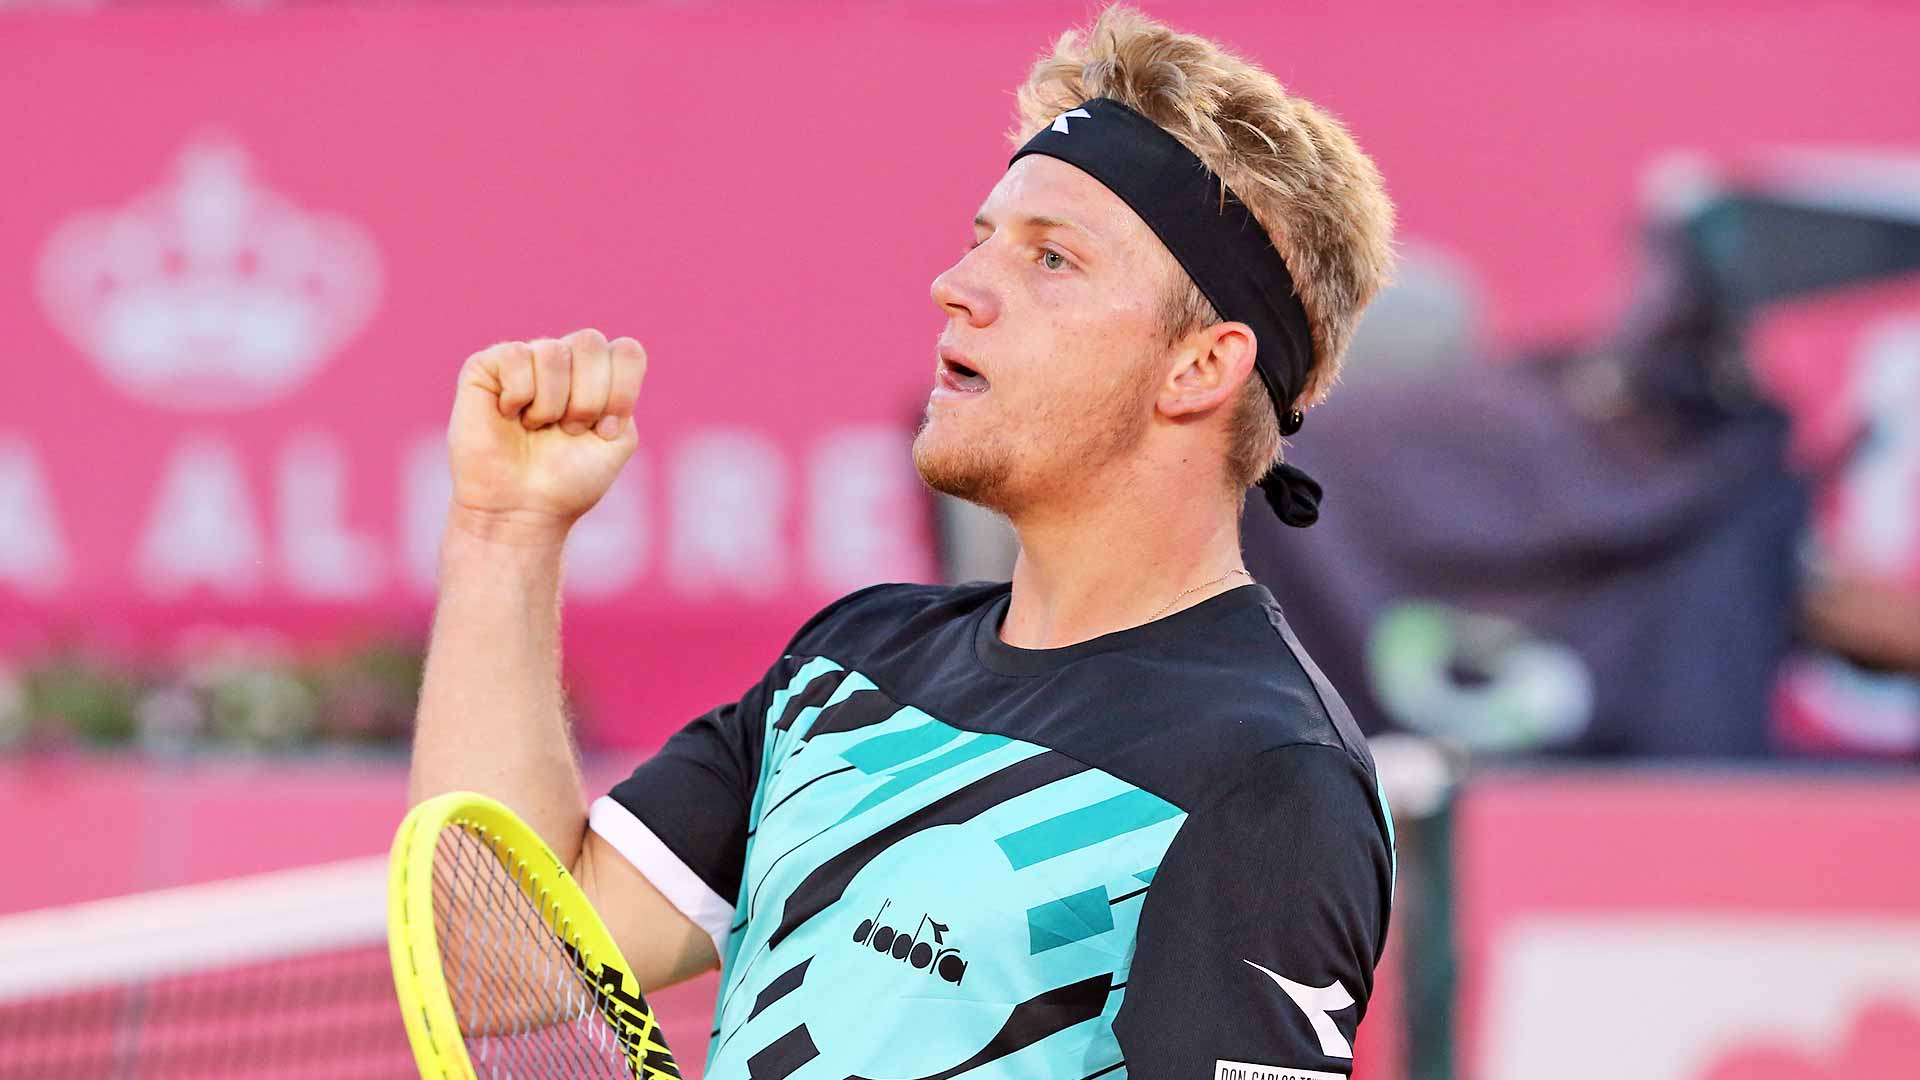 Alejandro Davidovich Fokina defeats Gael Monfils in three sets on Friday to reach his first ATP Tour semi-final.